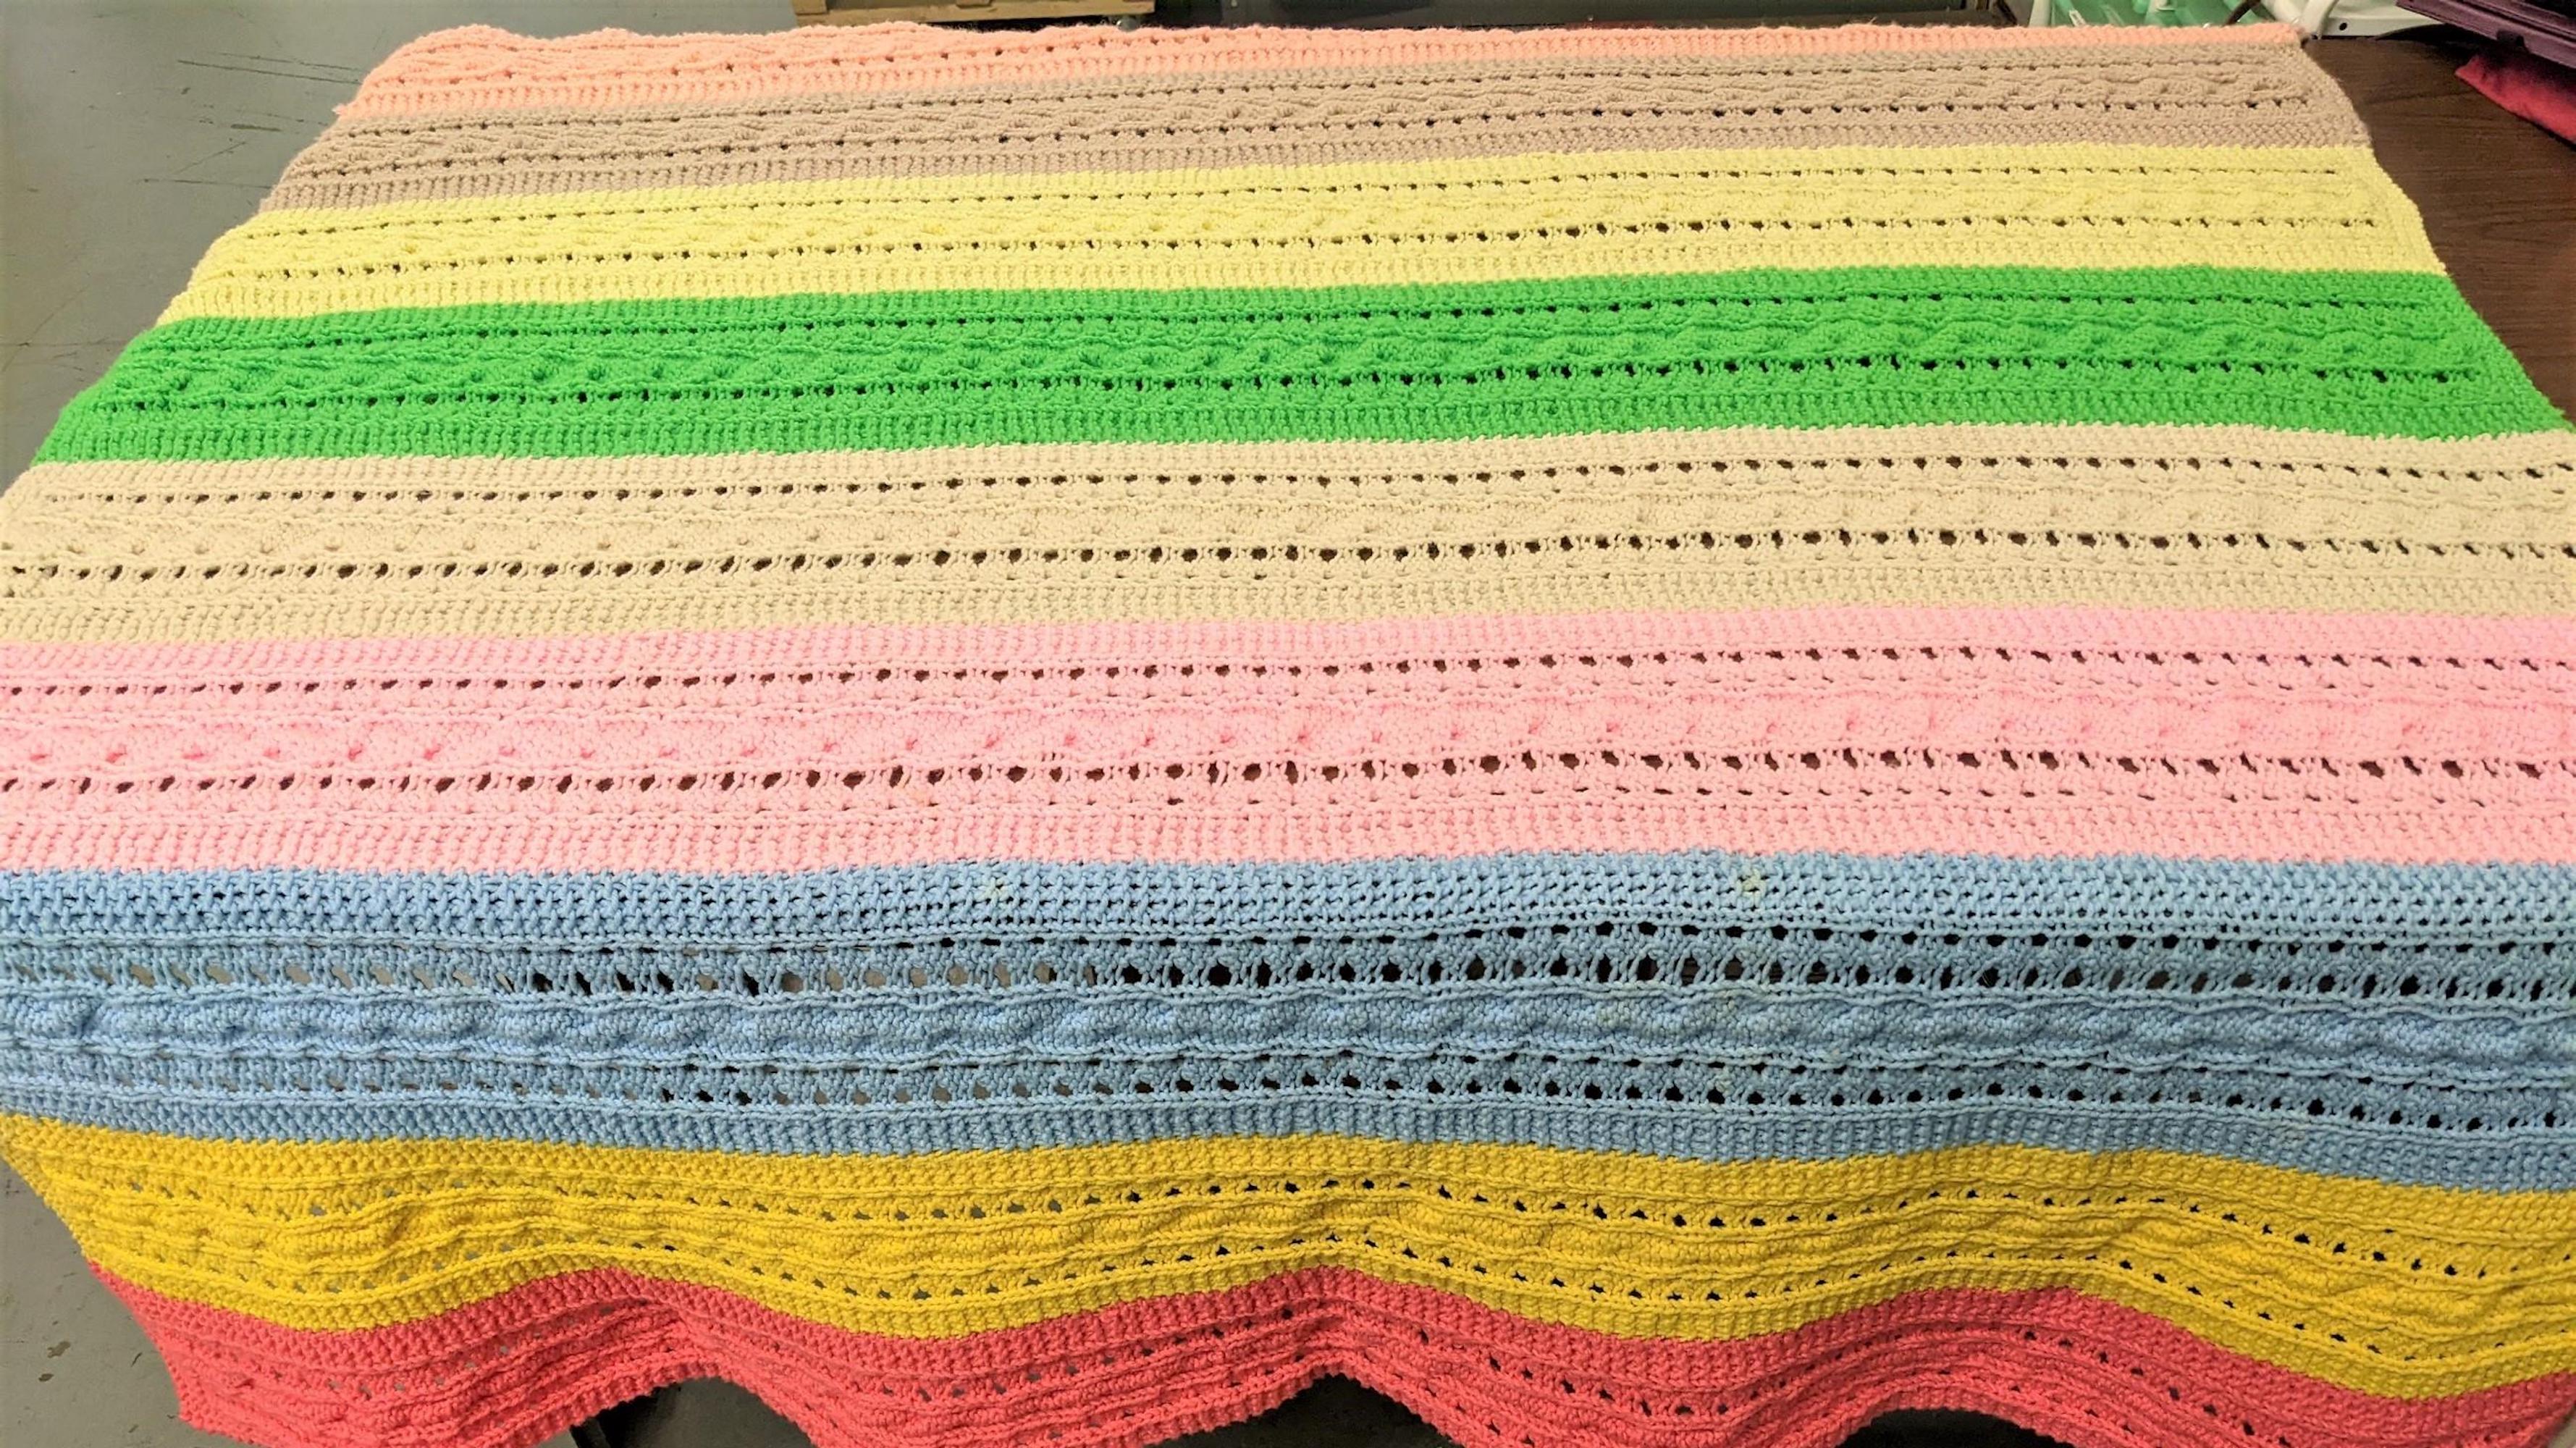 1988 Hand-Knit Rainbow Colored Cable Stitch Afghan Throw (54\